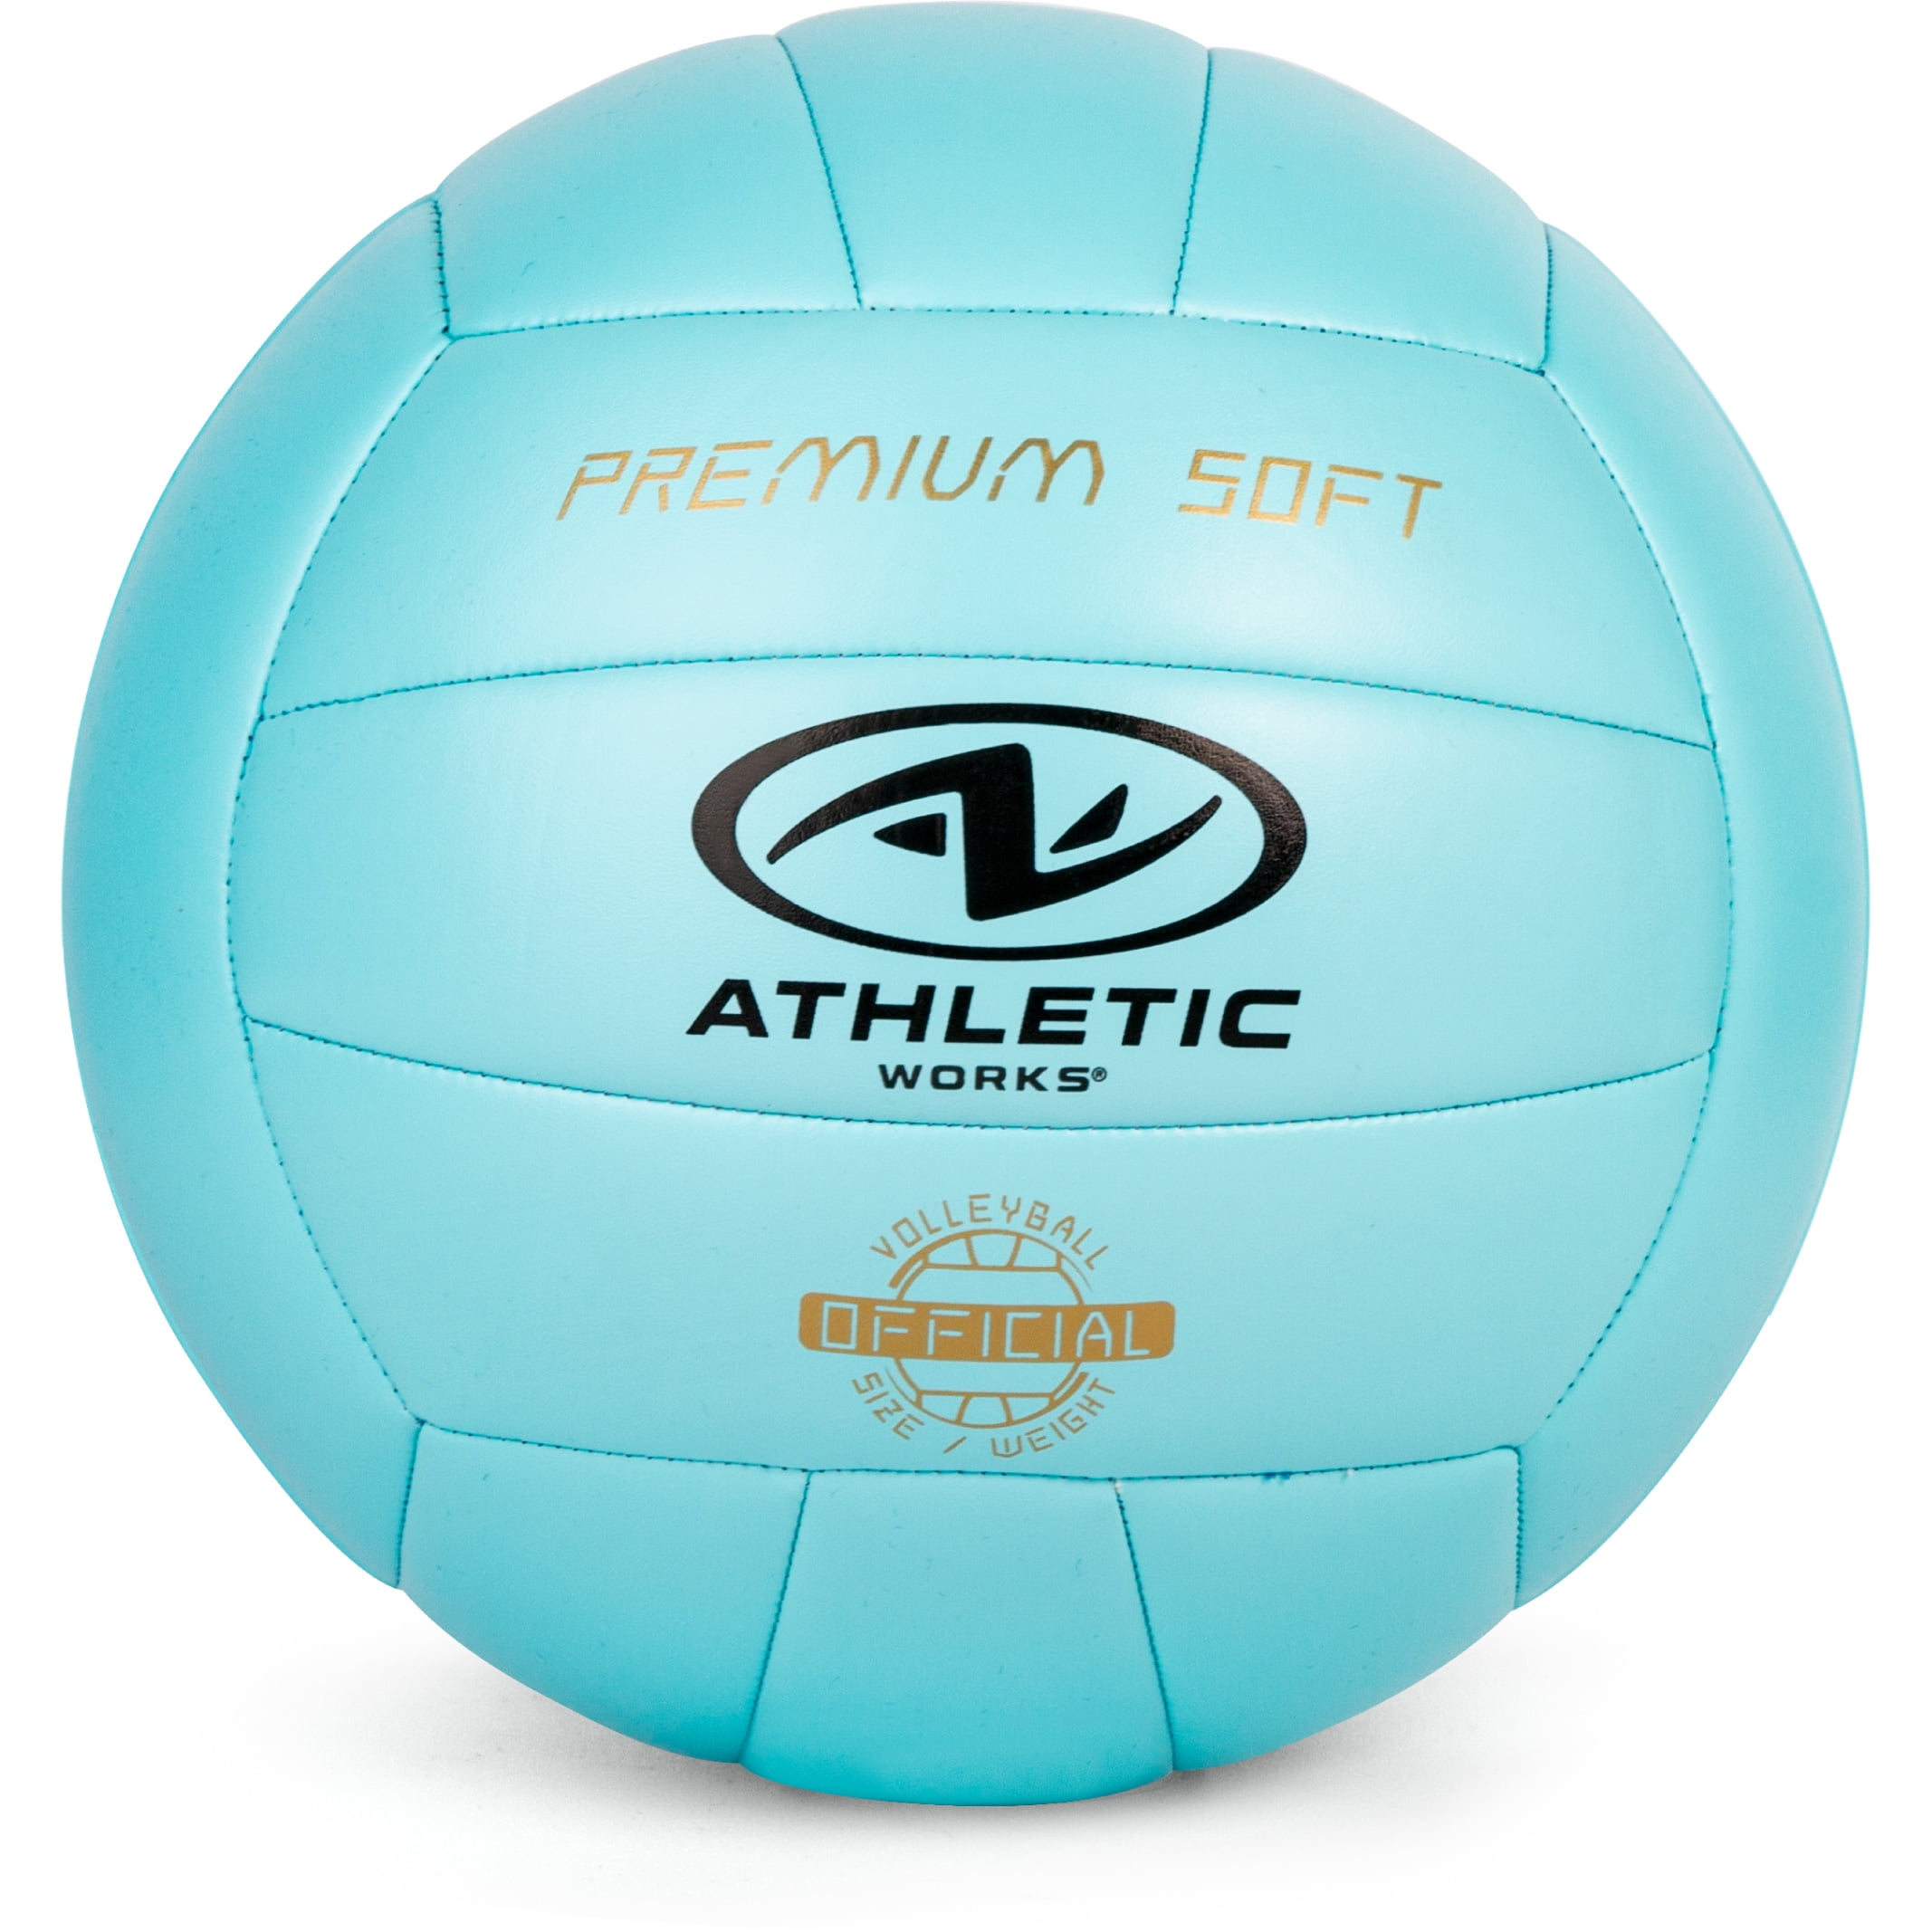 Athletic Works Size 5 Premium Soft Volleyball, Blue